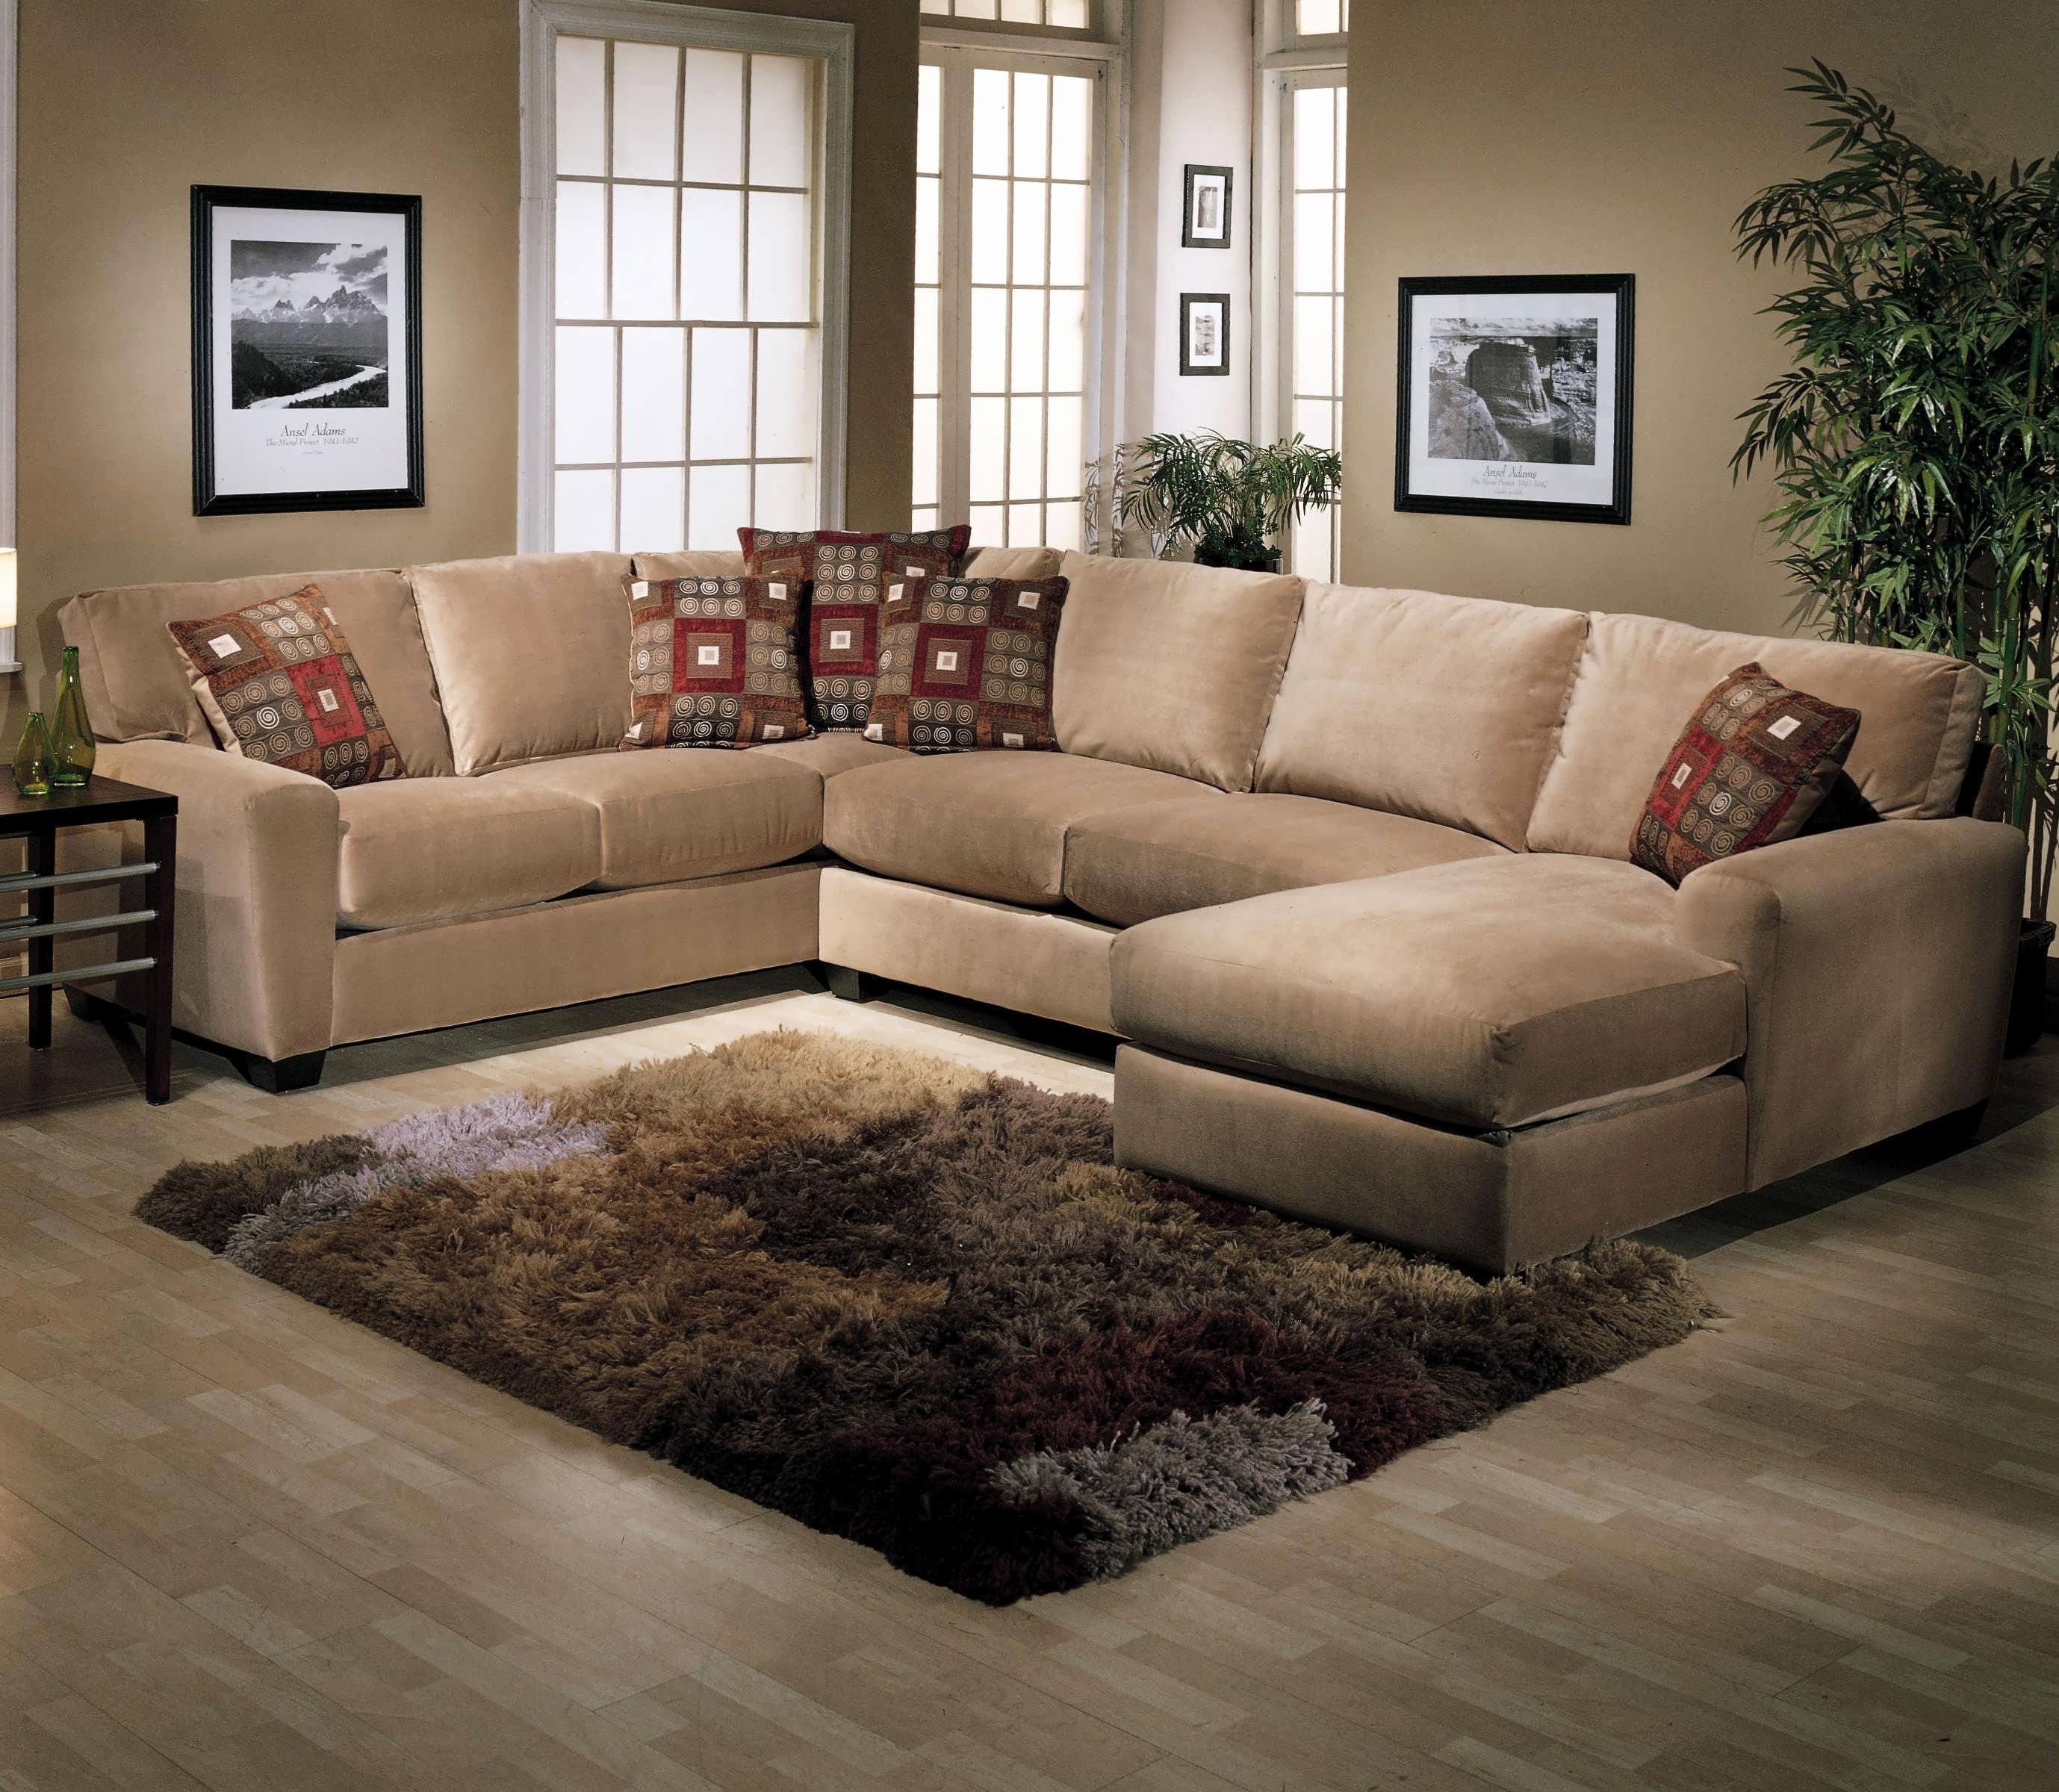 Inspirational U Shaped Modular Sectional Sofa 2018 – Couches Ideas Within Big U Shaped Sectionals (View 8 of 15)